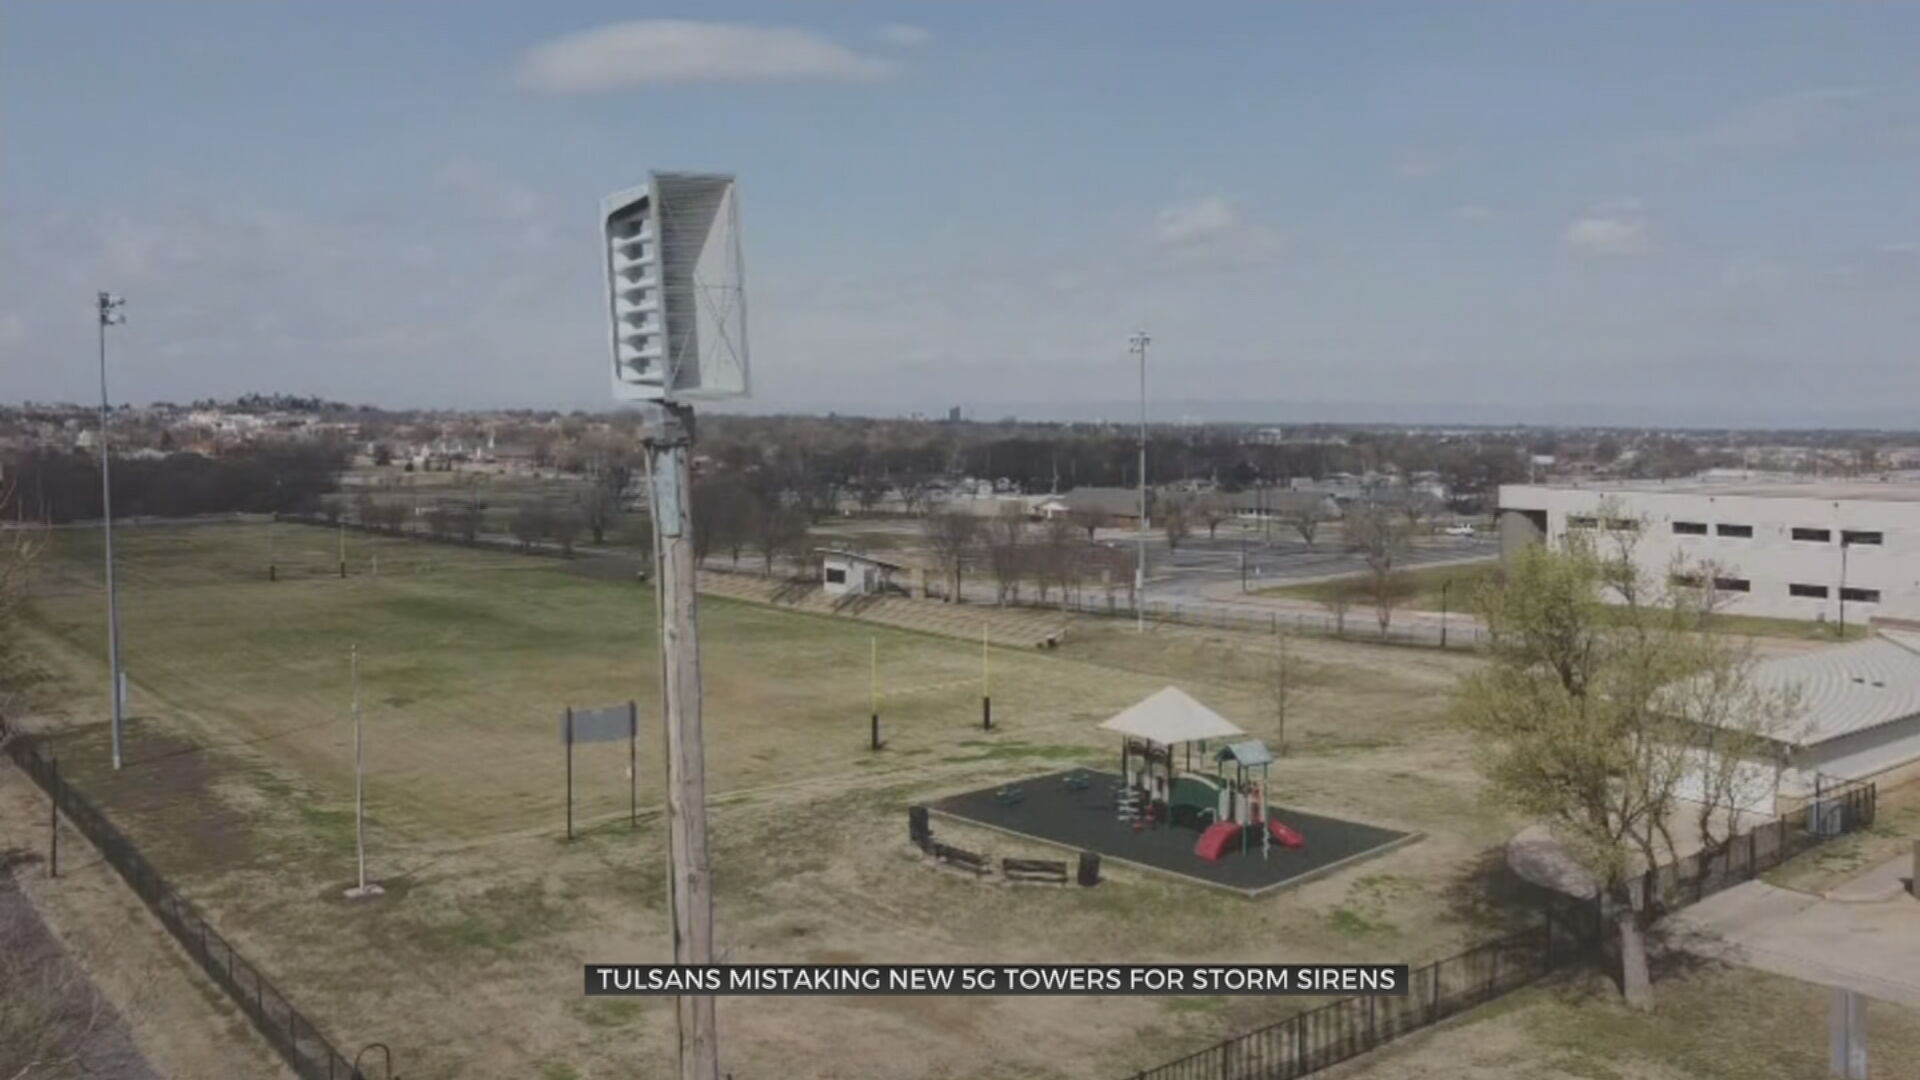 New 5G Cell Phone Towers Mistaken For Tulsa Storm Sirens 